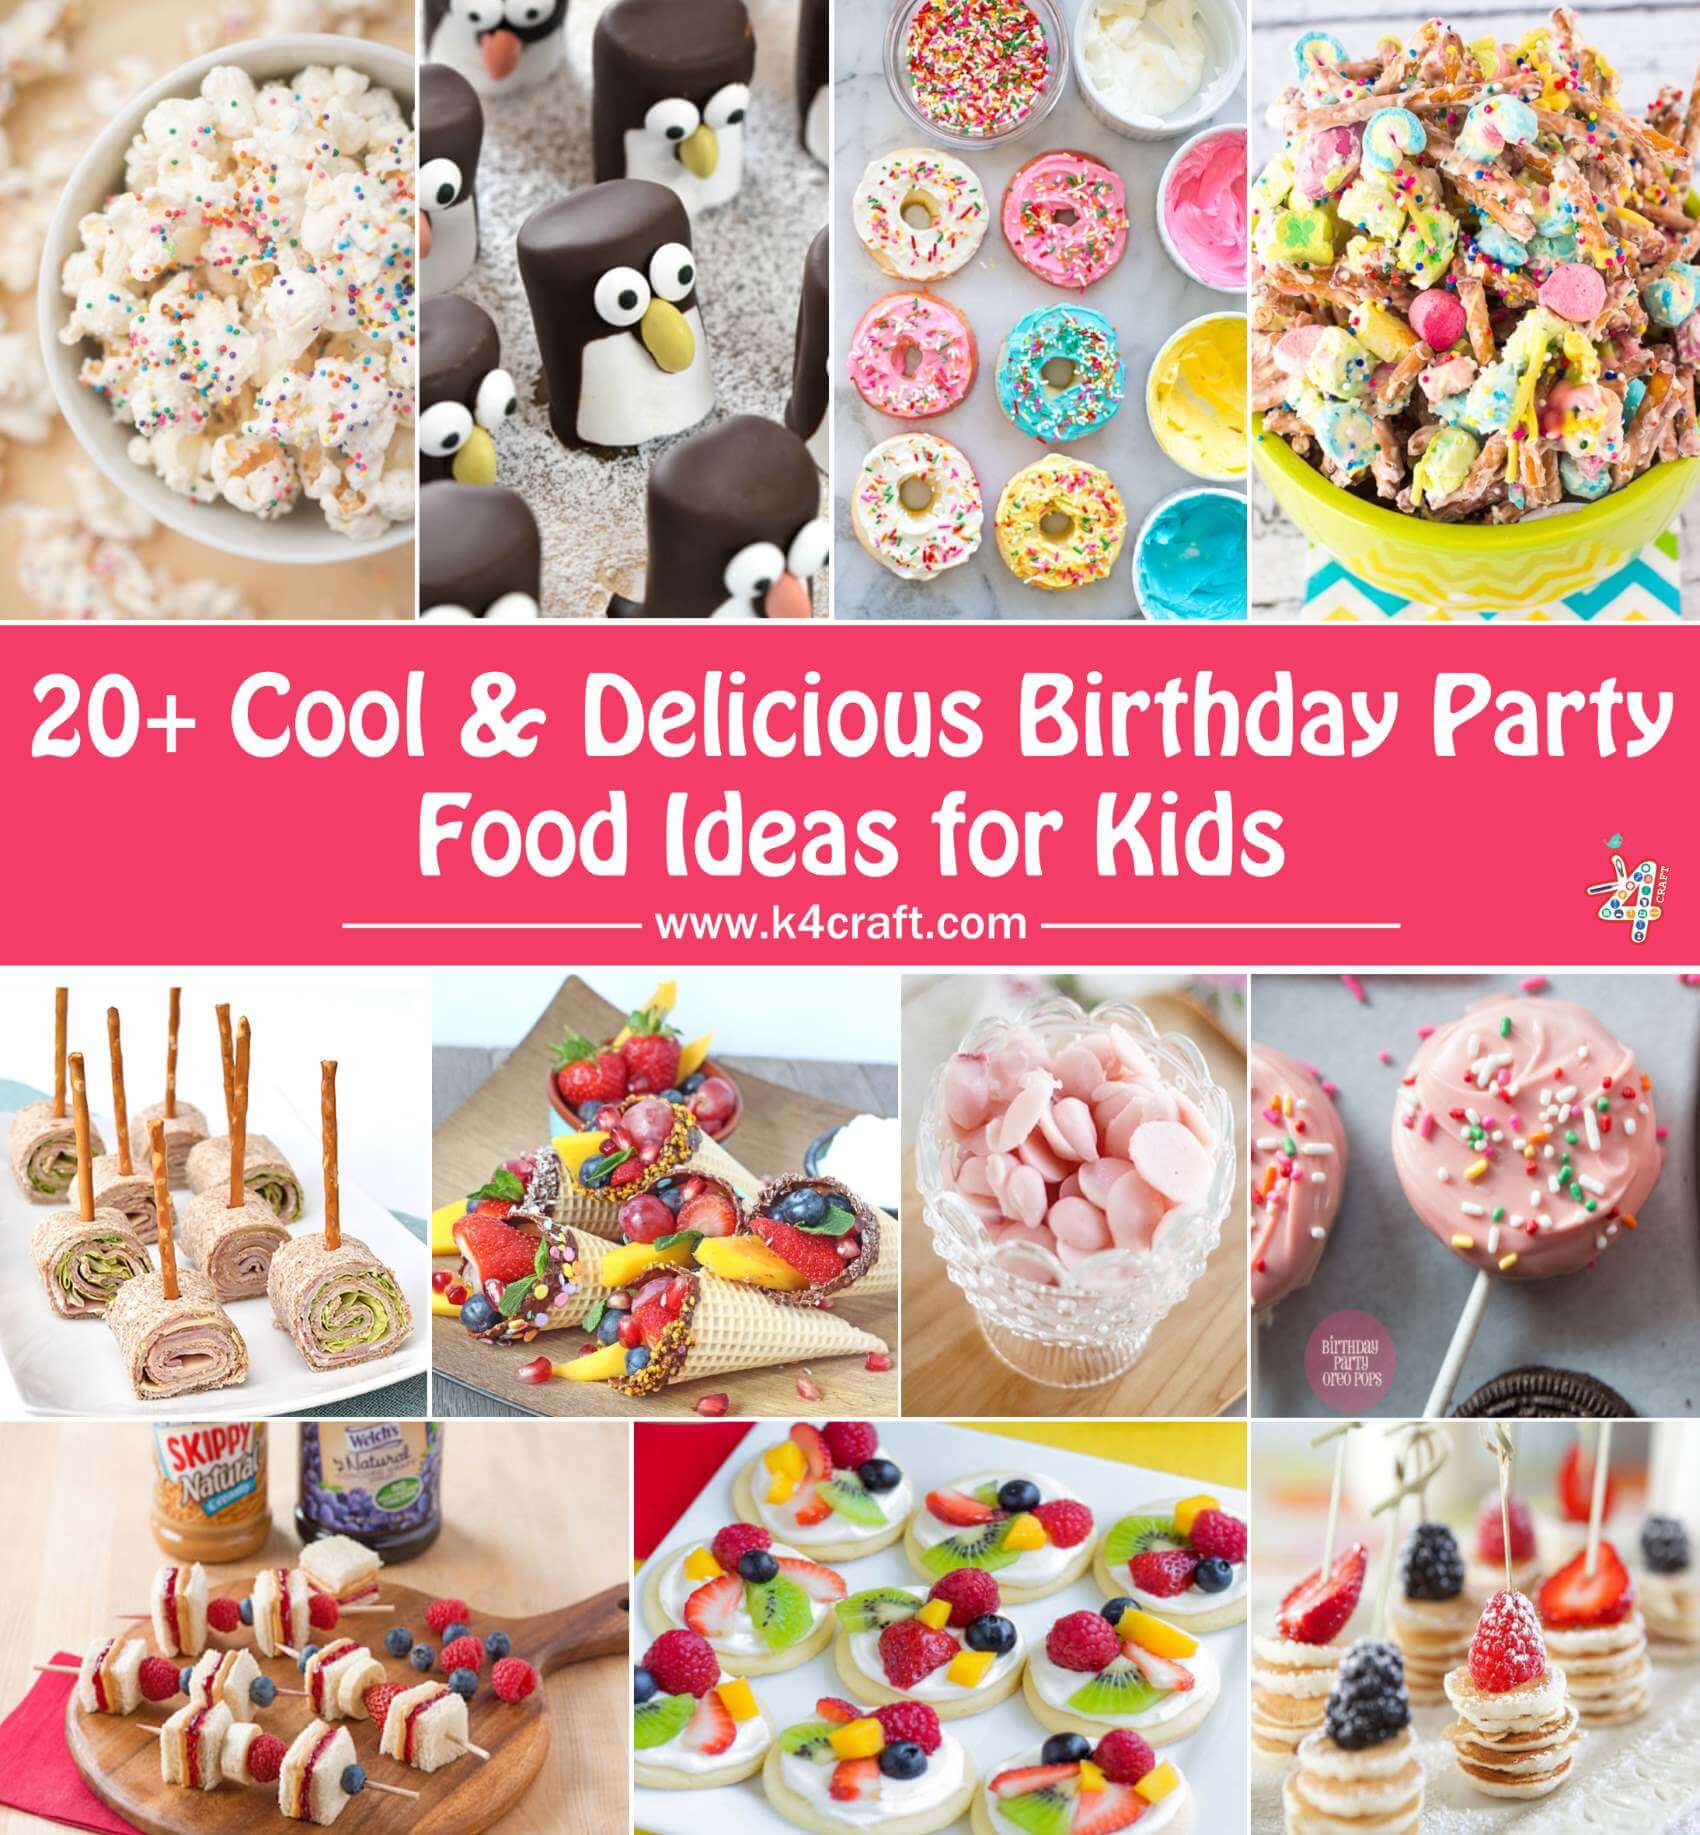 Party Food Ideas For Kids - Cheese Frosting Recipe